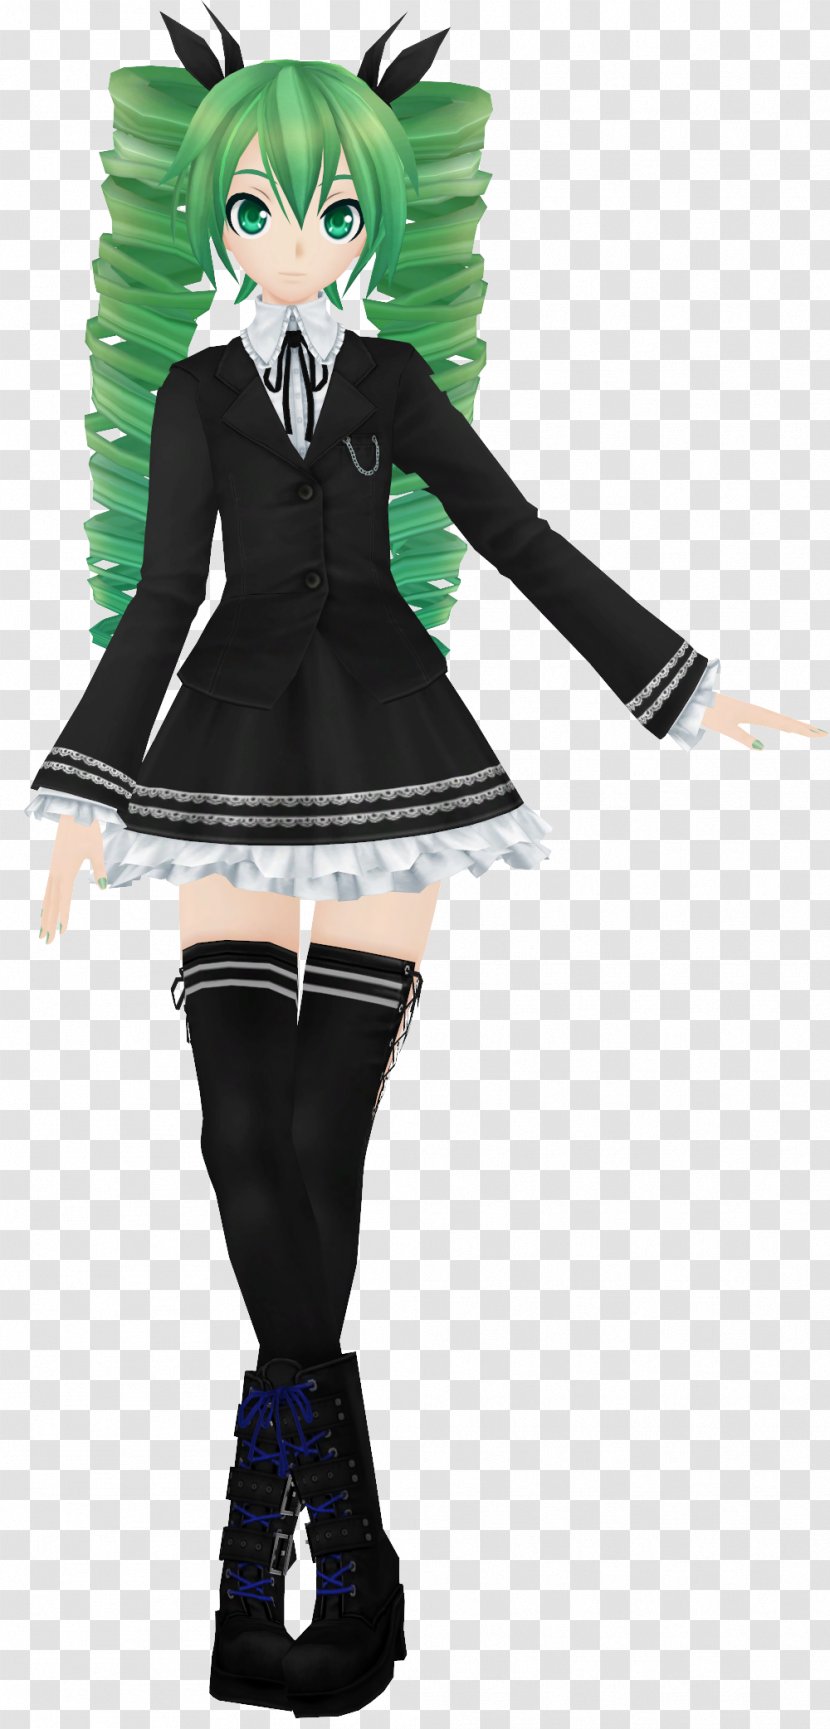 Hatsune Miku: Project DIVA F Extend 2nd - Tree - Rigging Transparent PNG